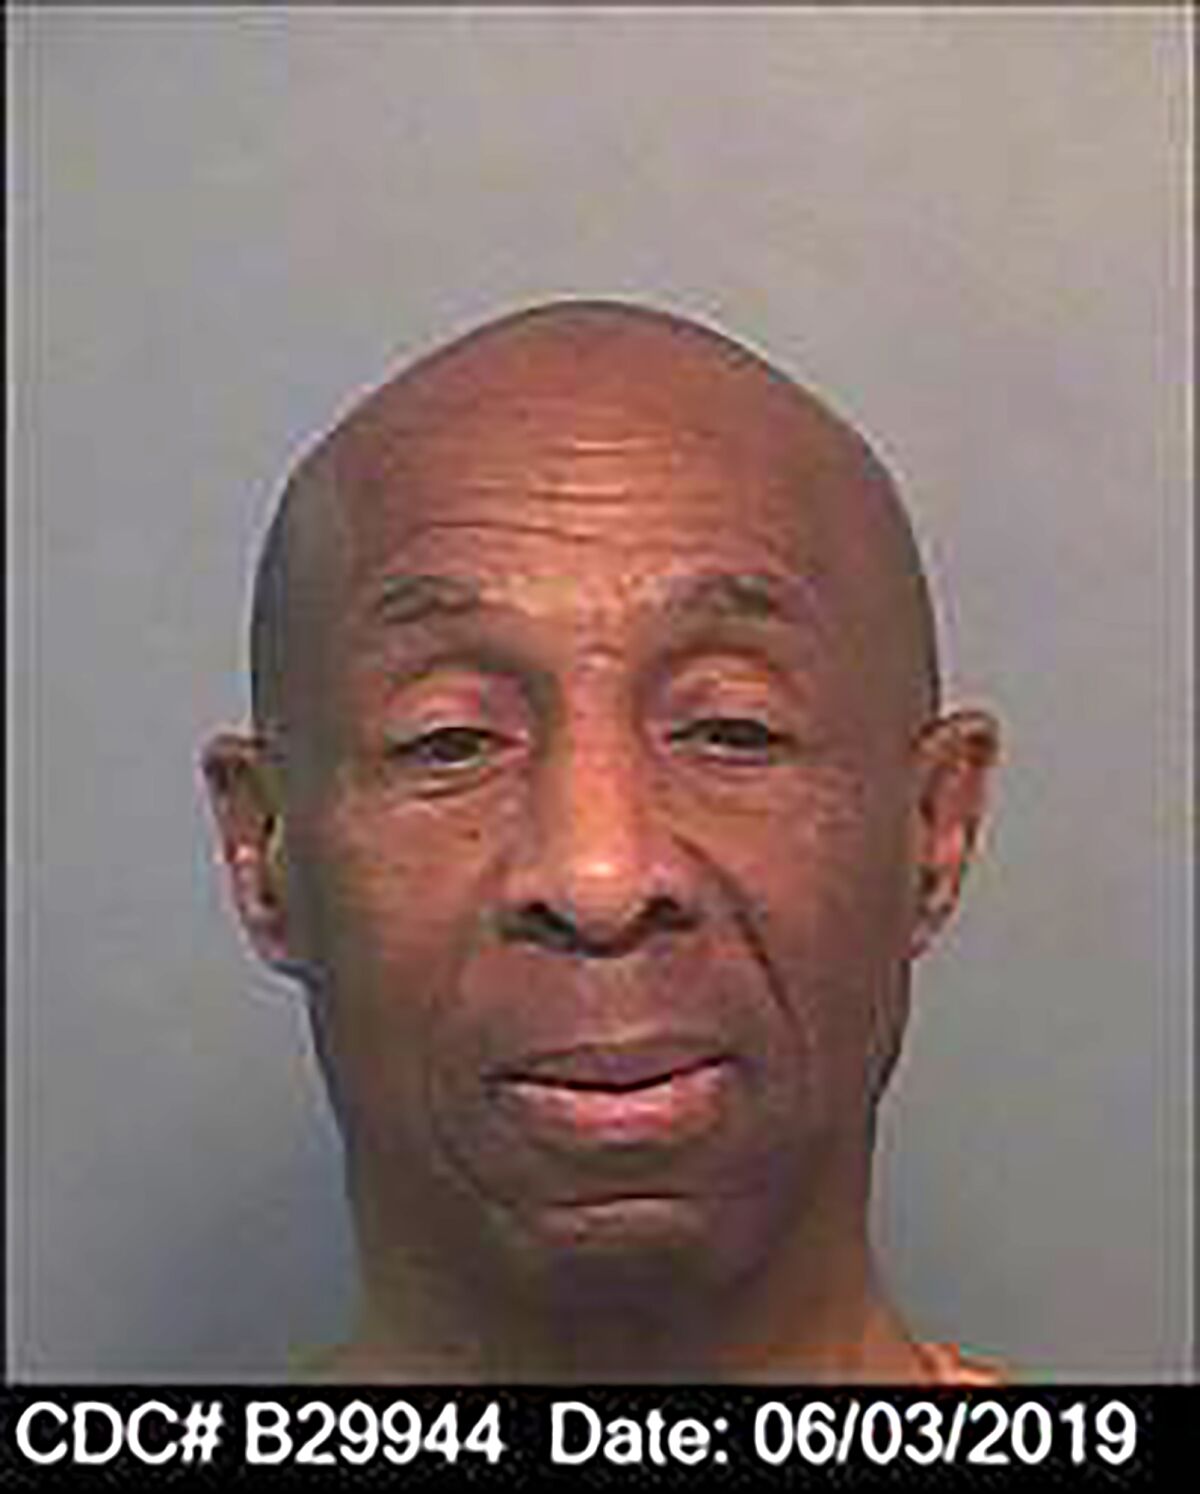 This June 3, 2019 photo provided by the California Department of Correction and Rehabilitation shows Jessie Lee Cooks. Cooks who was convicted along with three others in the racially motivated killing spree that terrorized San Francisco in the 1970s died in a prison cell while on hospice care, officials announced Thursday, July 1, 2021. (CDCR via AP)